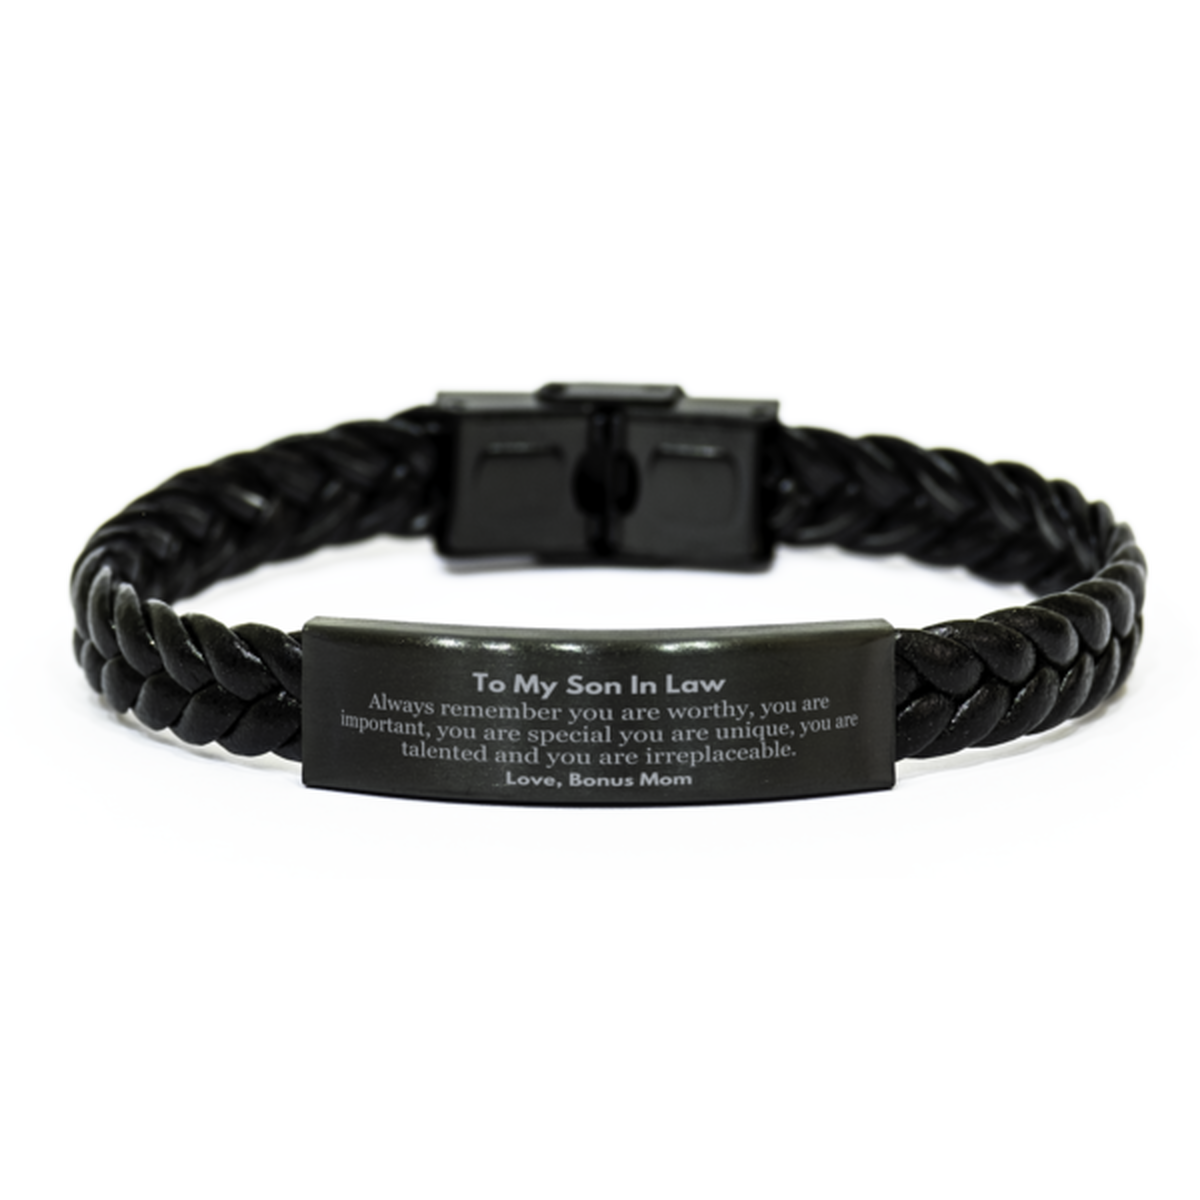 Son In Law Birthday Gifts from Bonus Mom, Inspirational Braided Leather Bracelet for Son In Law Christmas Graduation Gifts for Son In Law Always remember you are worthy, you are important. Love, Bonus Mom